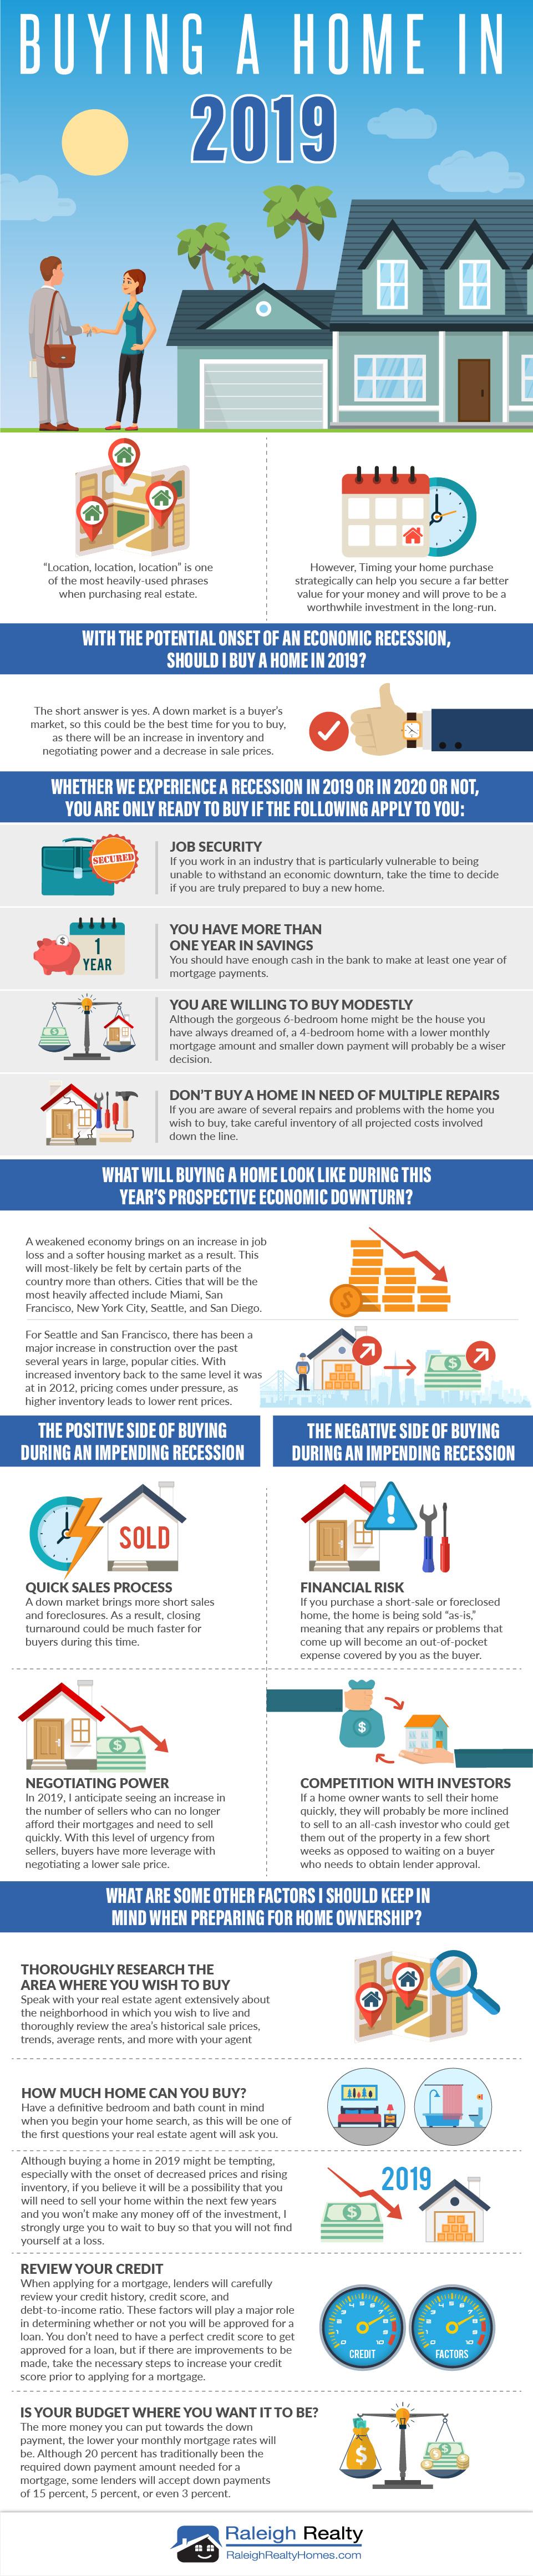 2019 Guide to Buying a Home: Pros and Cons {INFOGRAPHIC}